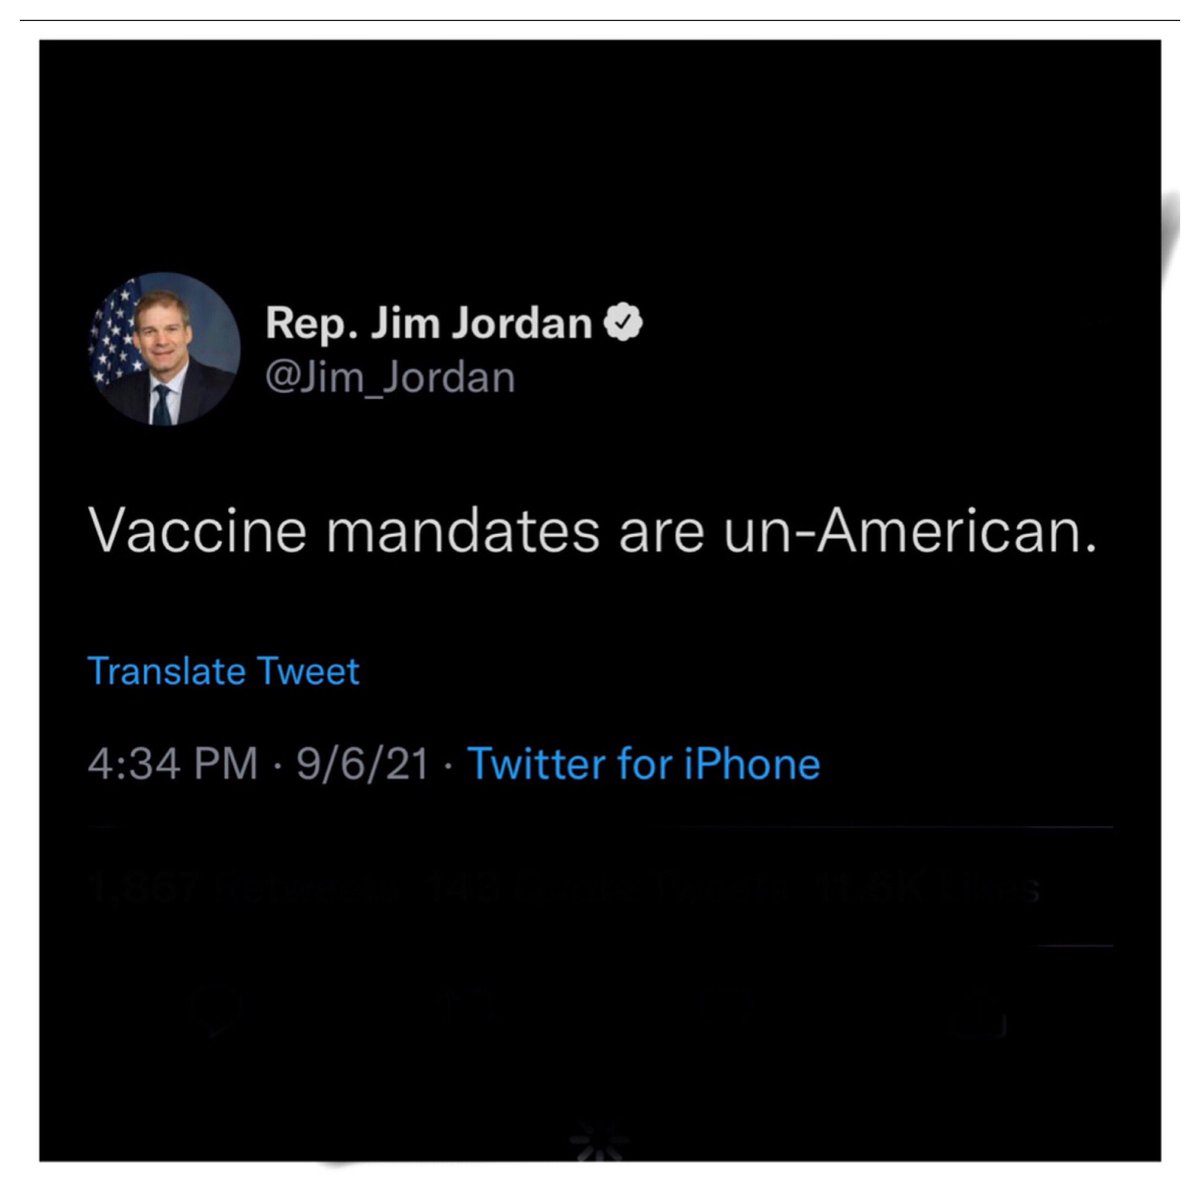 On January 6, 1777, George Washington ordered that all troops coming through Philadelphia be vaccinated against smallpox. 

On January 6, 2021, Jim Jordan incited an insurrection.